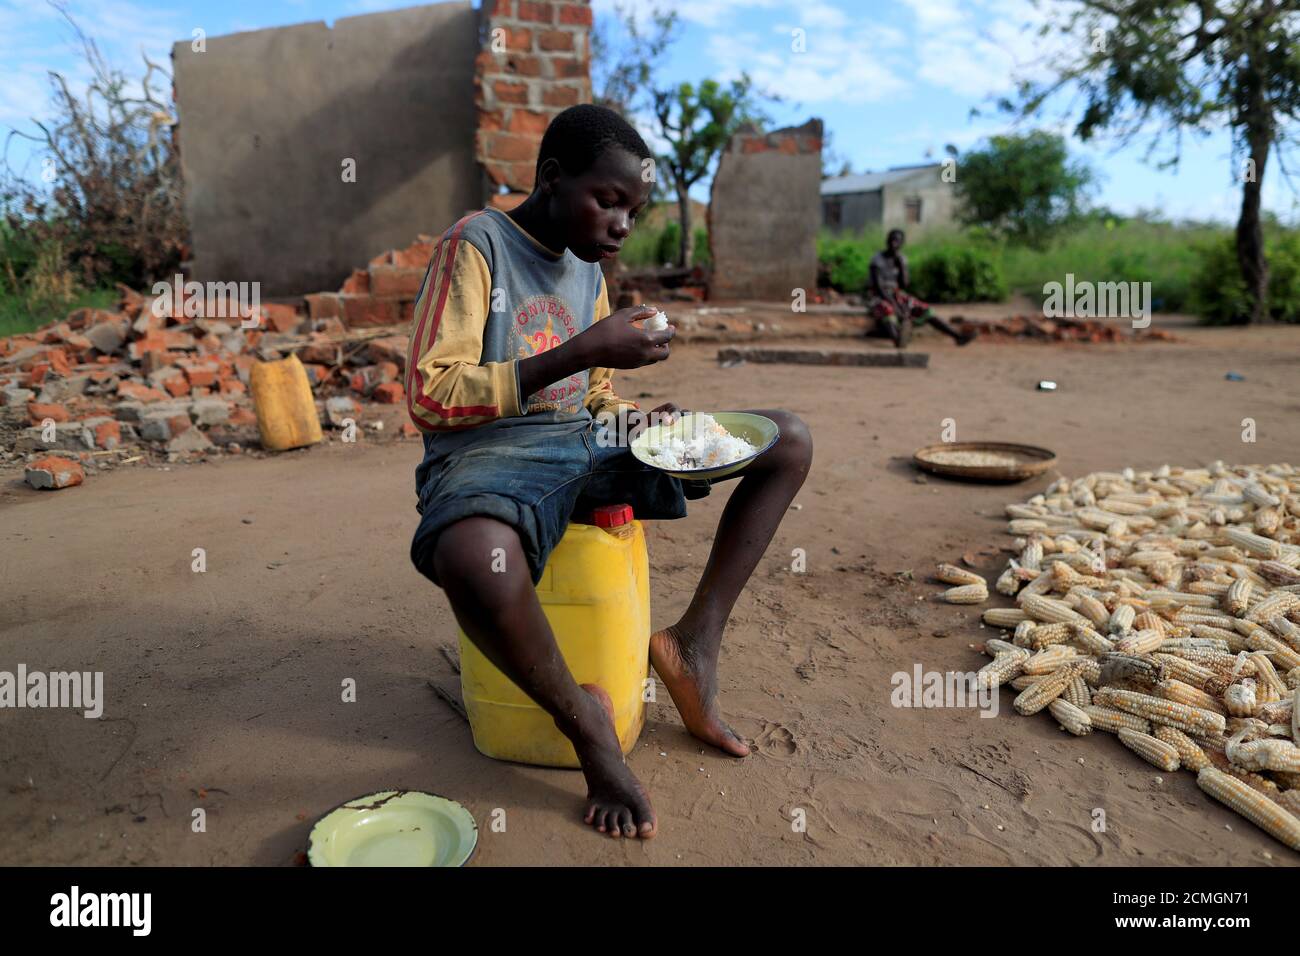 Bernado Jofresse, 14, eats rice for breakfast as he sits beside his family's damaged house in the aftermath of Cyclone Idai, in the village of Cheia, which means 'Flood' in Portuguese, near Beira, Mozambique April 3, 2019. REUTERS/Zohra Bensemra  SEARCH 'BENSEMRA FLOOD' FOR THIS STORY. SEARCH 'WIDER IMAGE' FOR ALL STORIES. Stock Photo